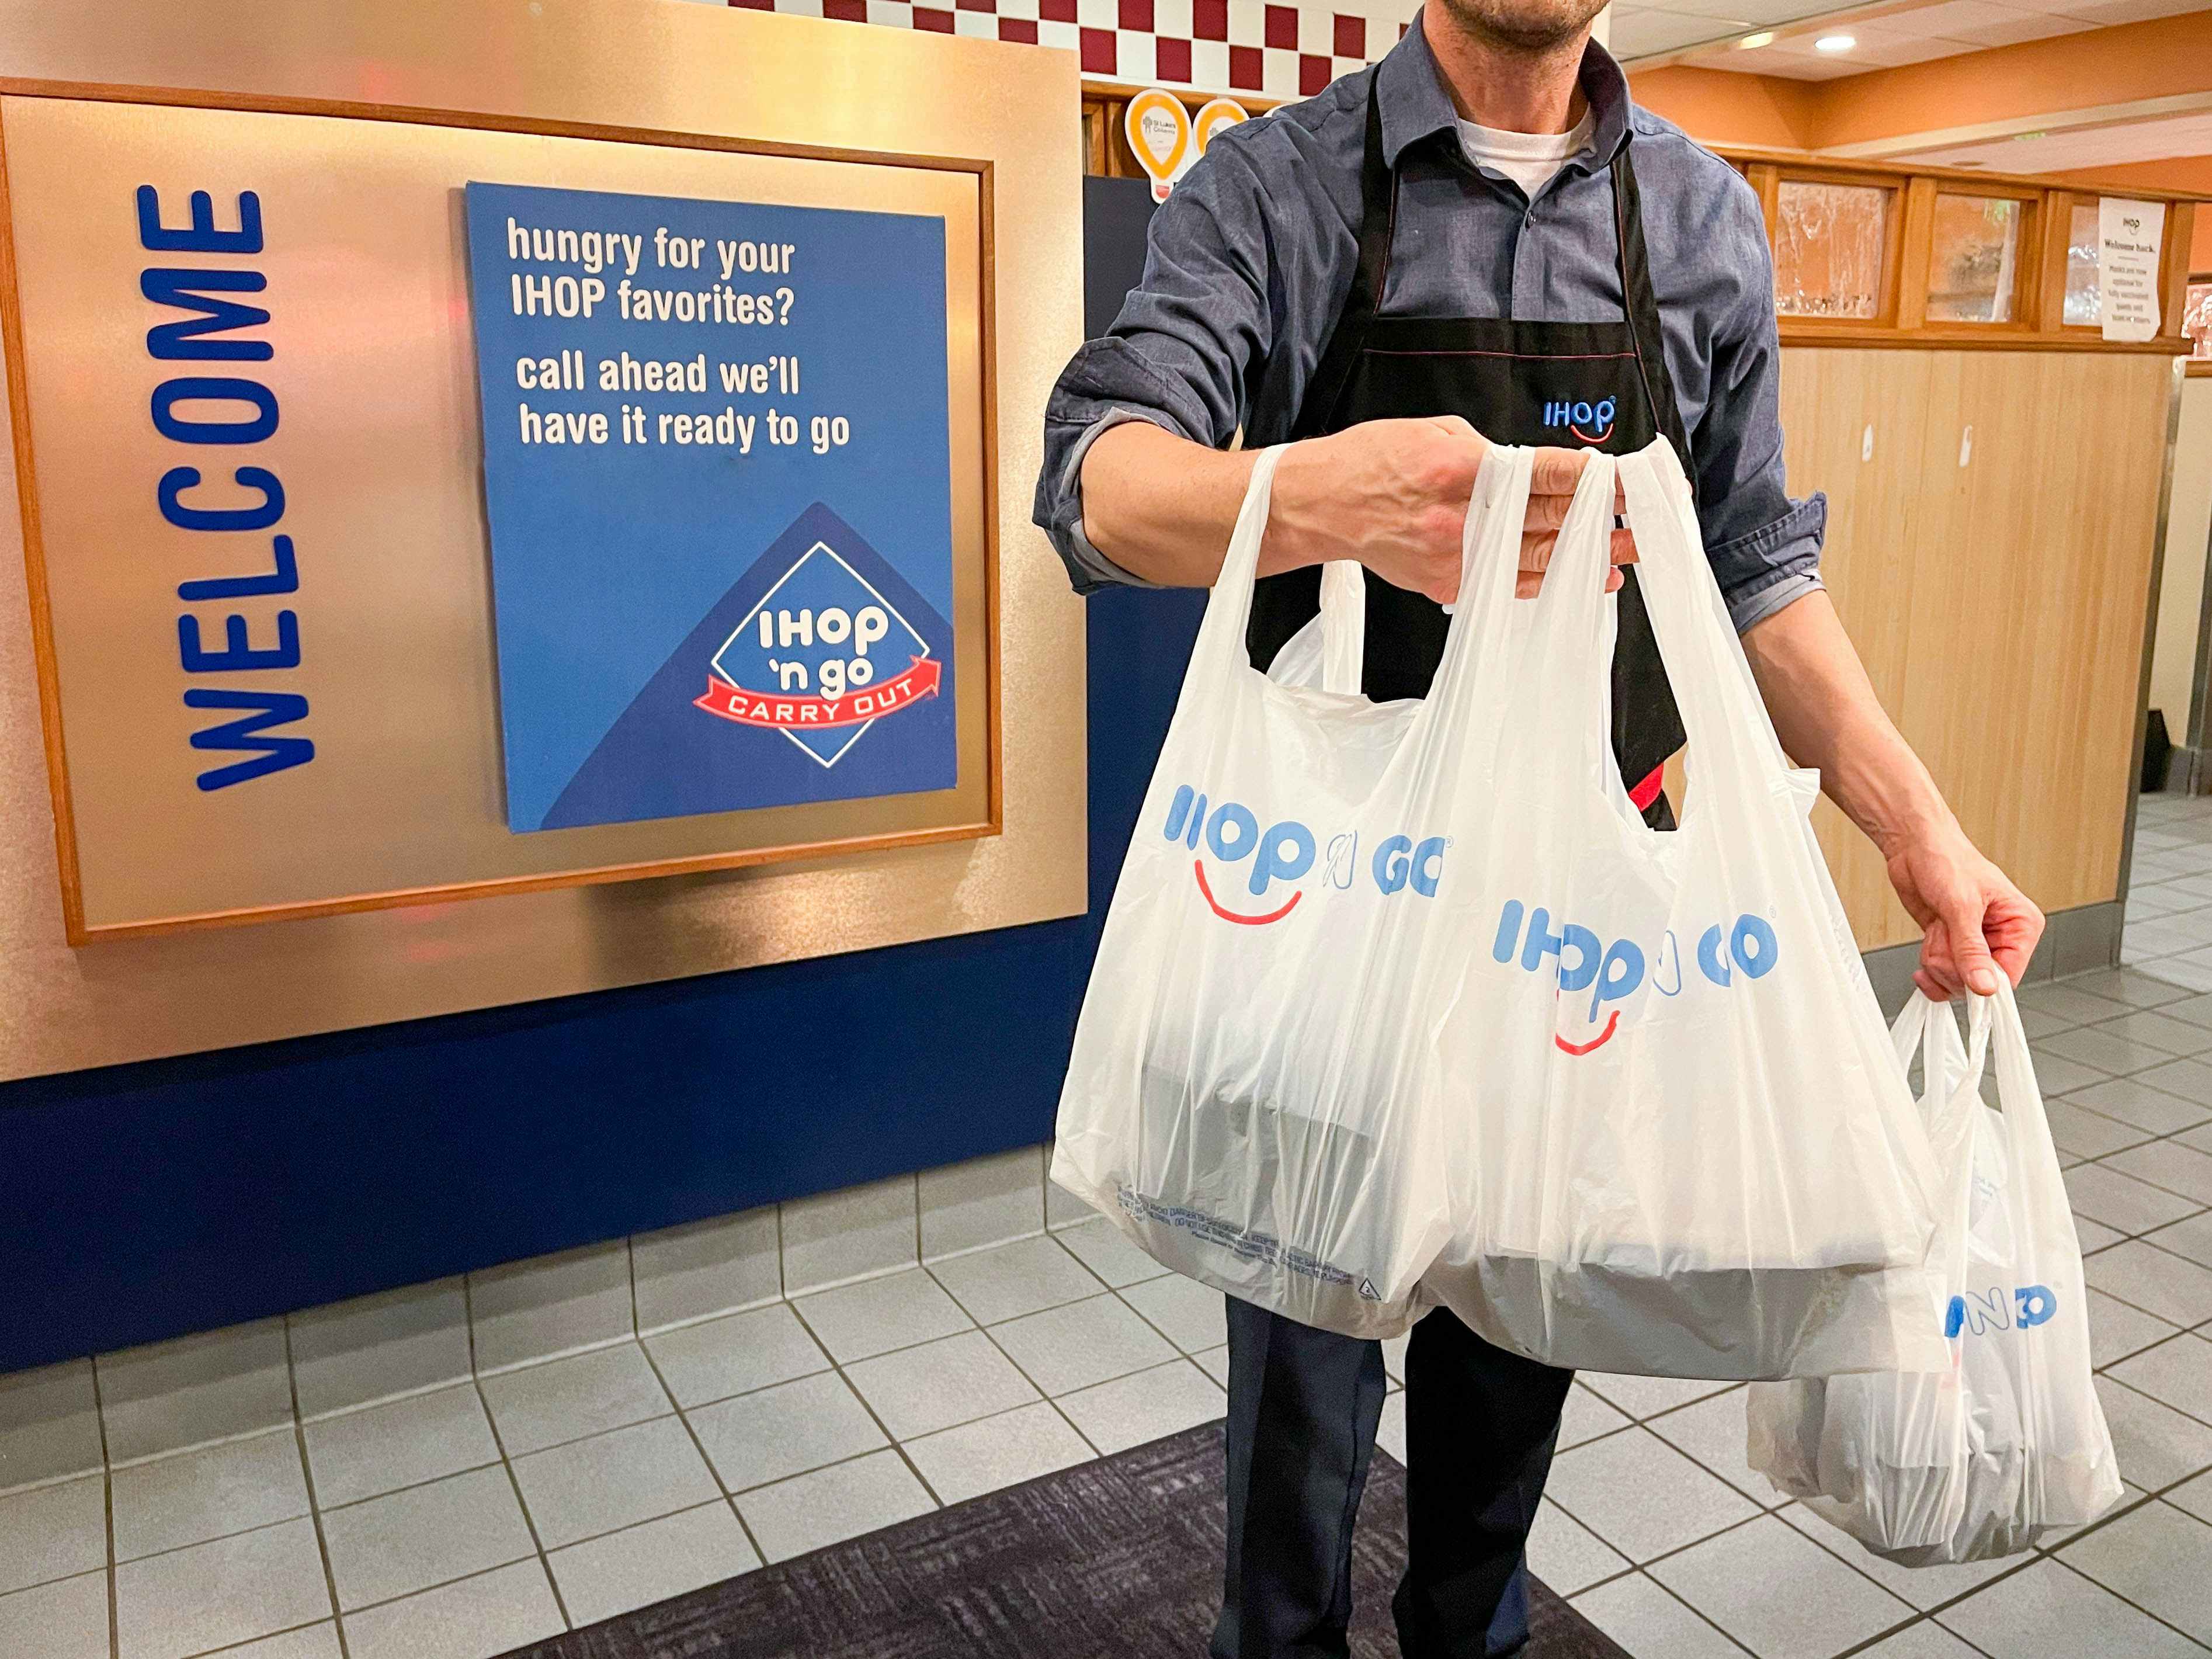 An IHOP employee holding some bags of IHOP to go orders.